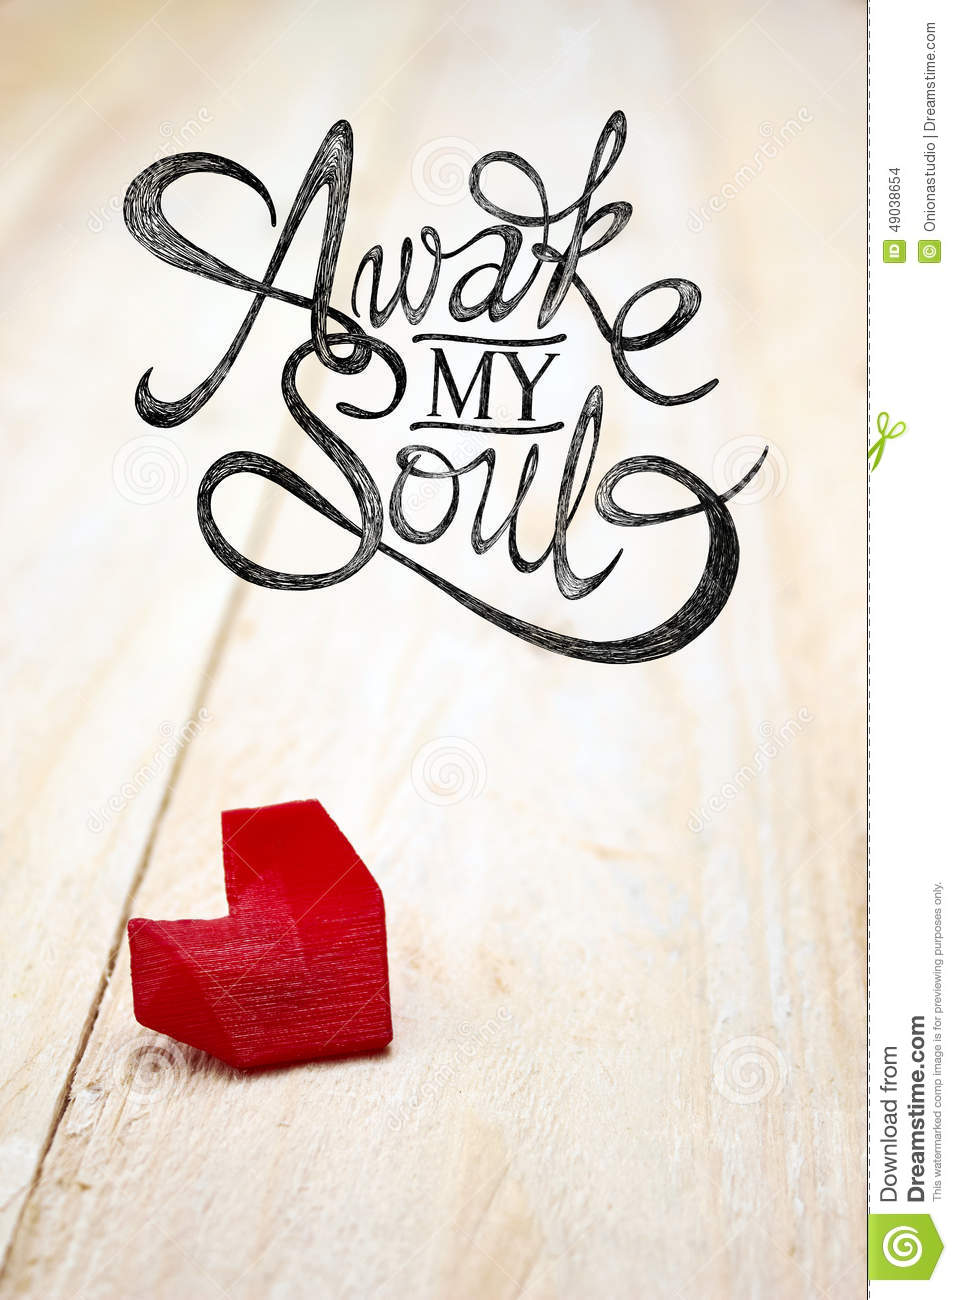 Awake My Soul Valentine Day Illustration Of Lonely Heart On White Wood